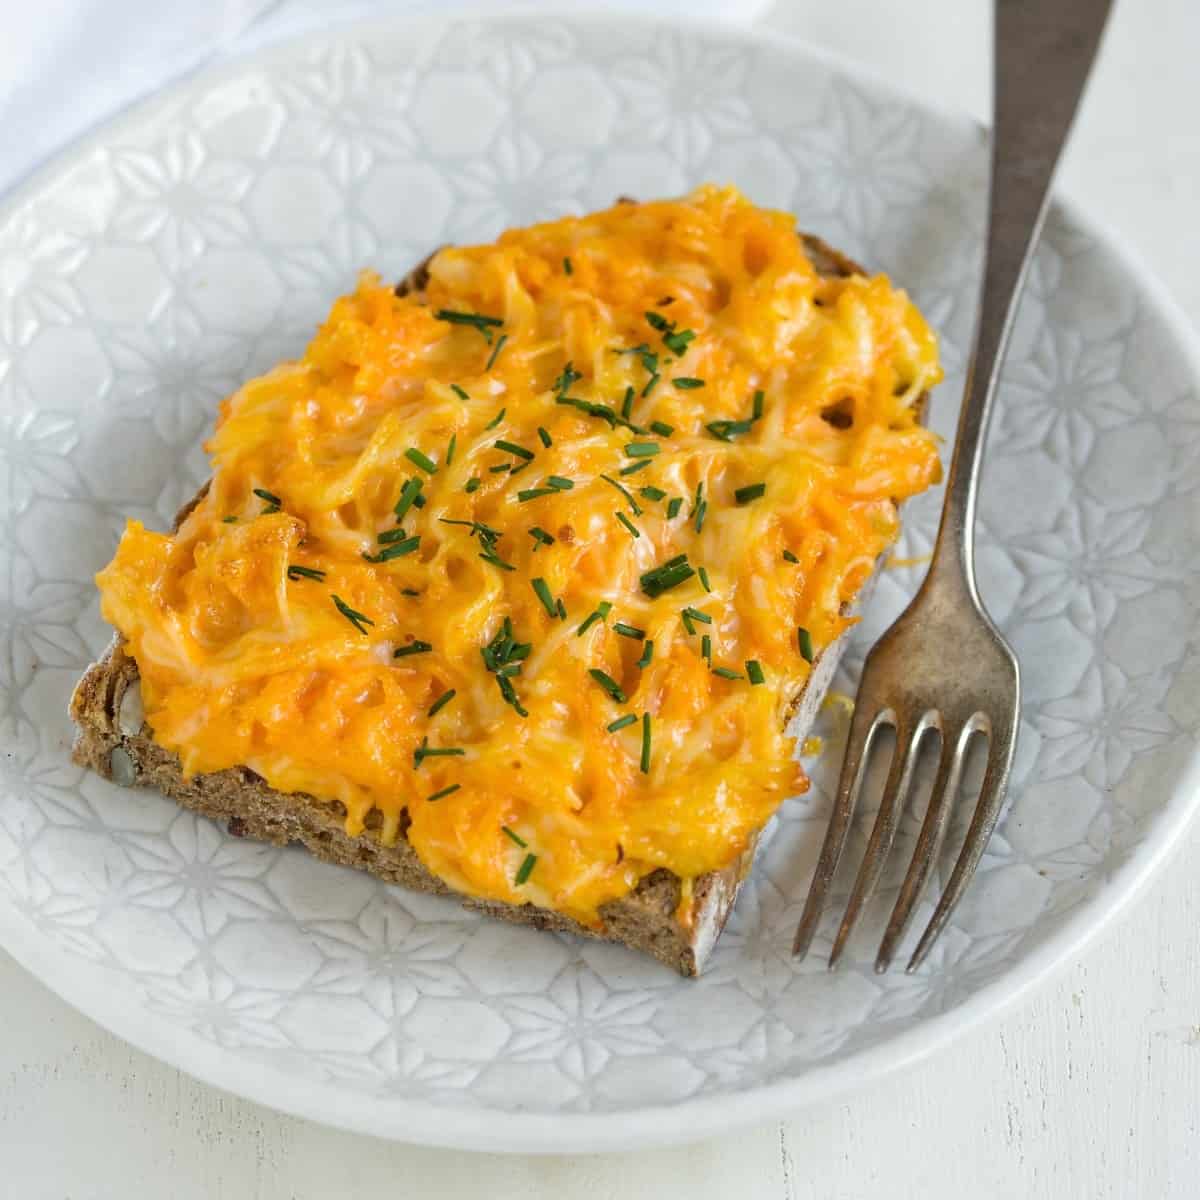 Broiled open-faced sandwich with carrot cheese spread, served on a white plate with a fork.